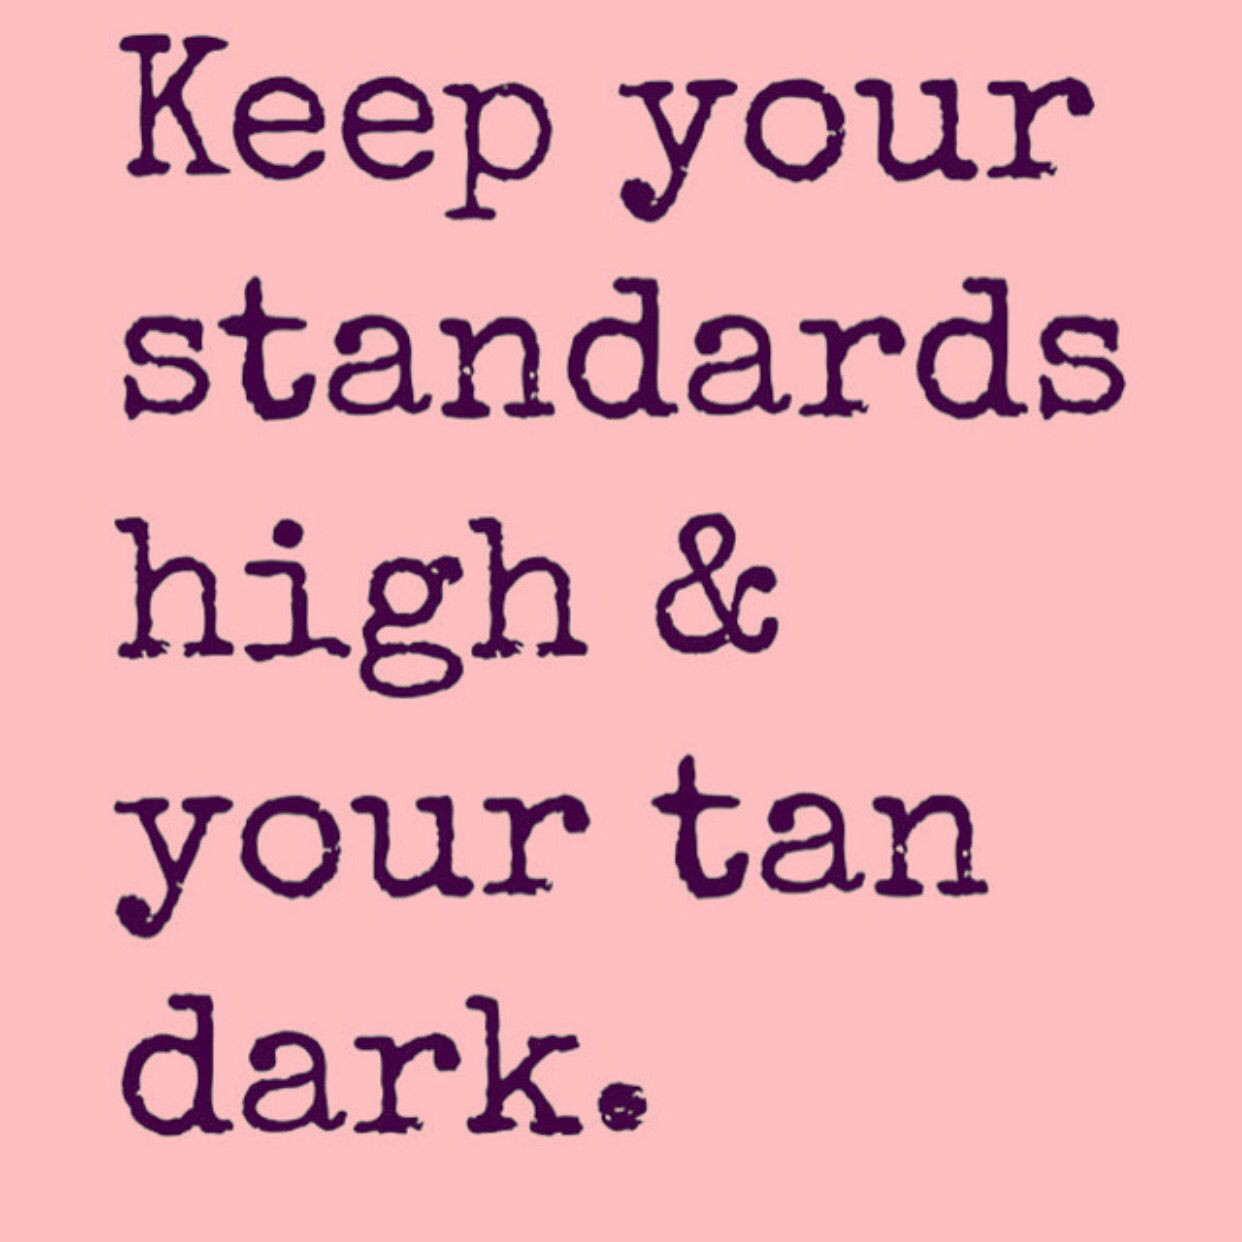 Funny tanning quotes